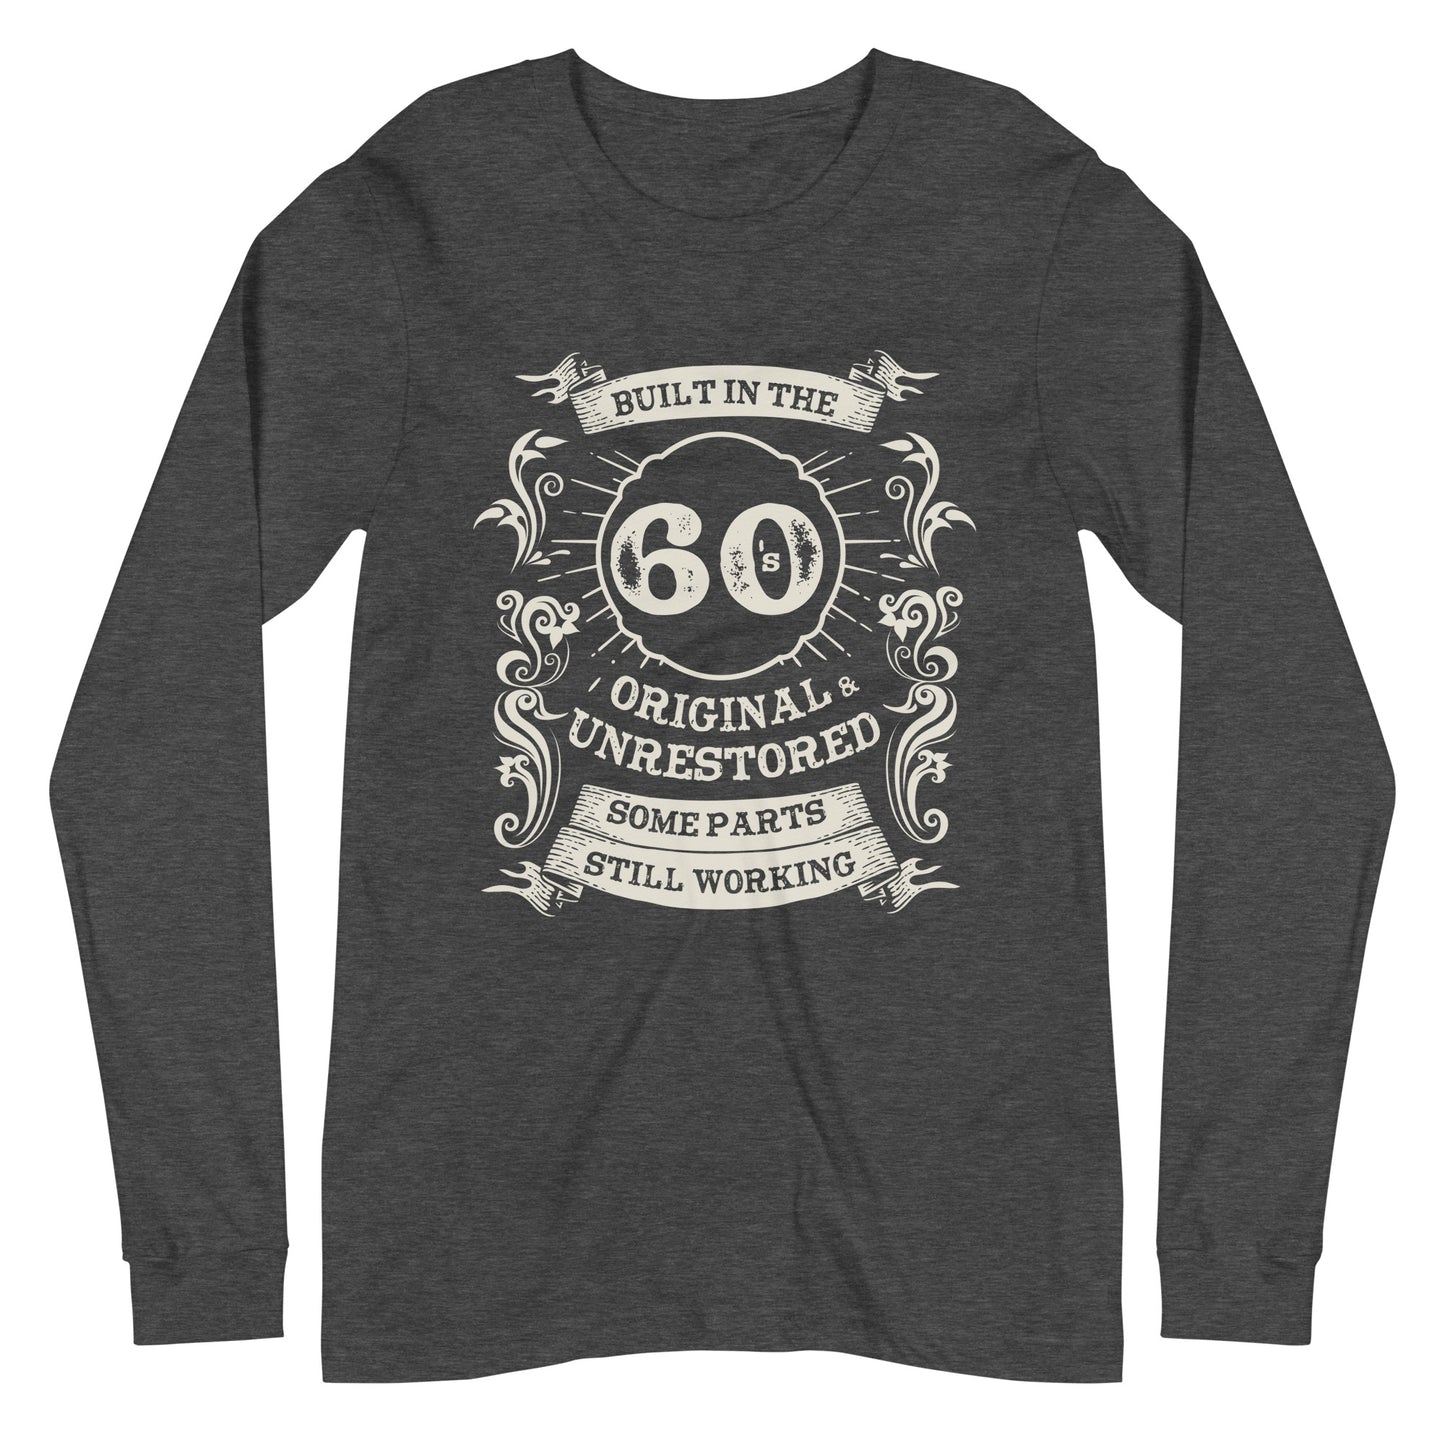 Built in the 60s, Original, Unrestored, Some Parts Still Working Long Sleeve Tee